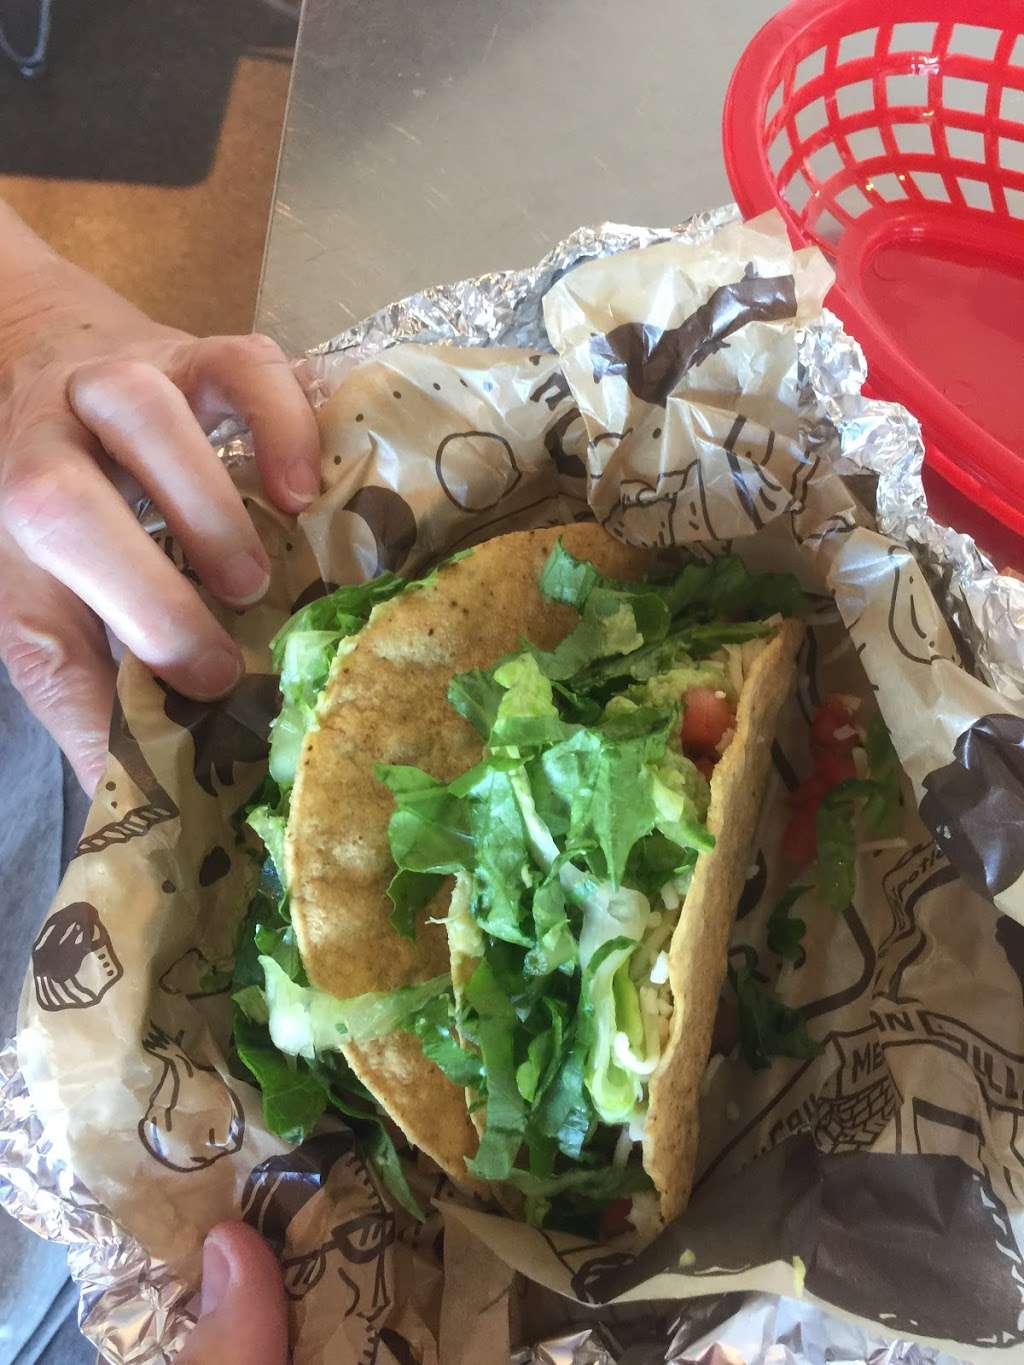 Chipotle Mexican Grill | 815 Thornton Pkwy, Thornton, CO 80229, USA | Phone: (303) 452-2722